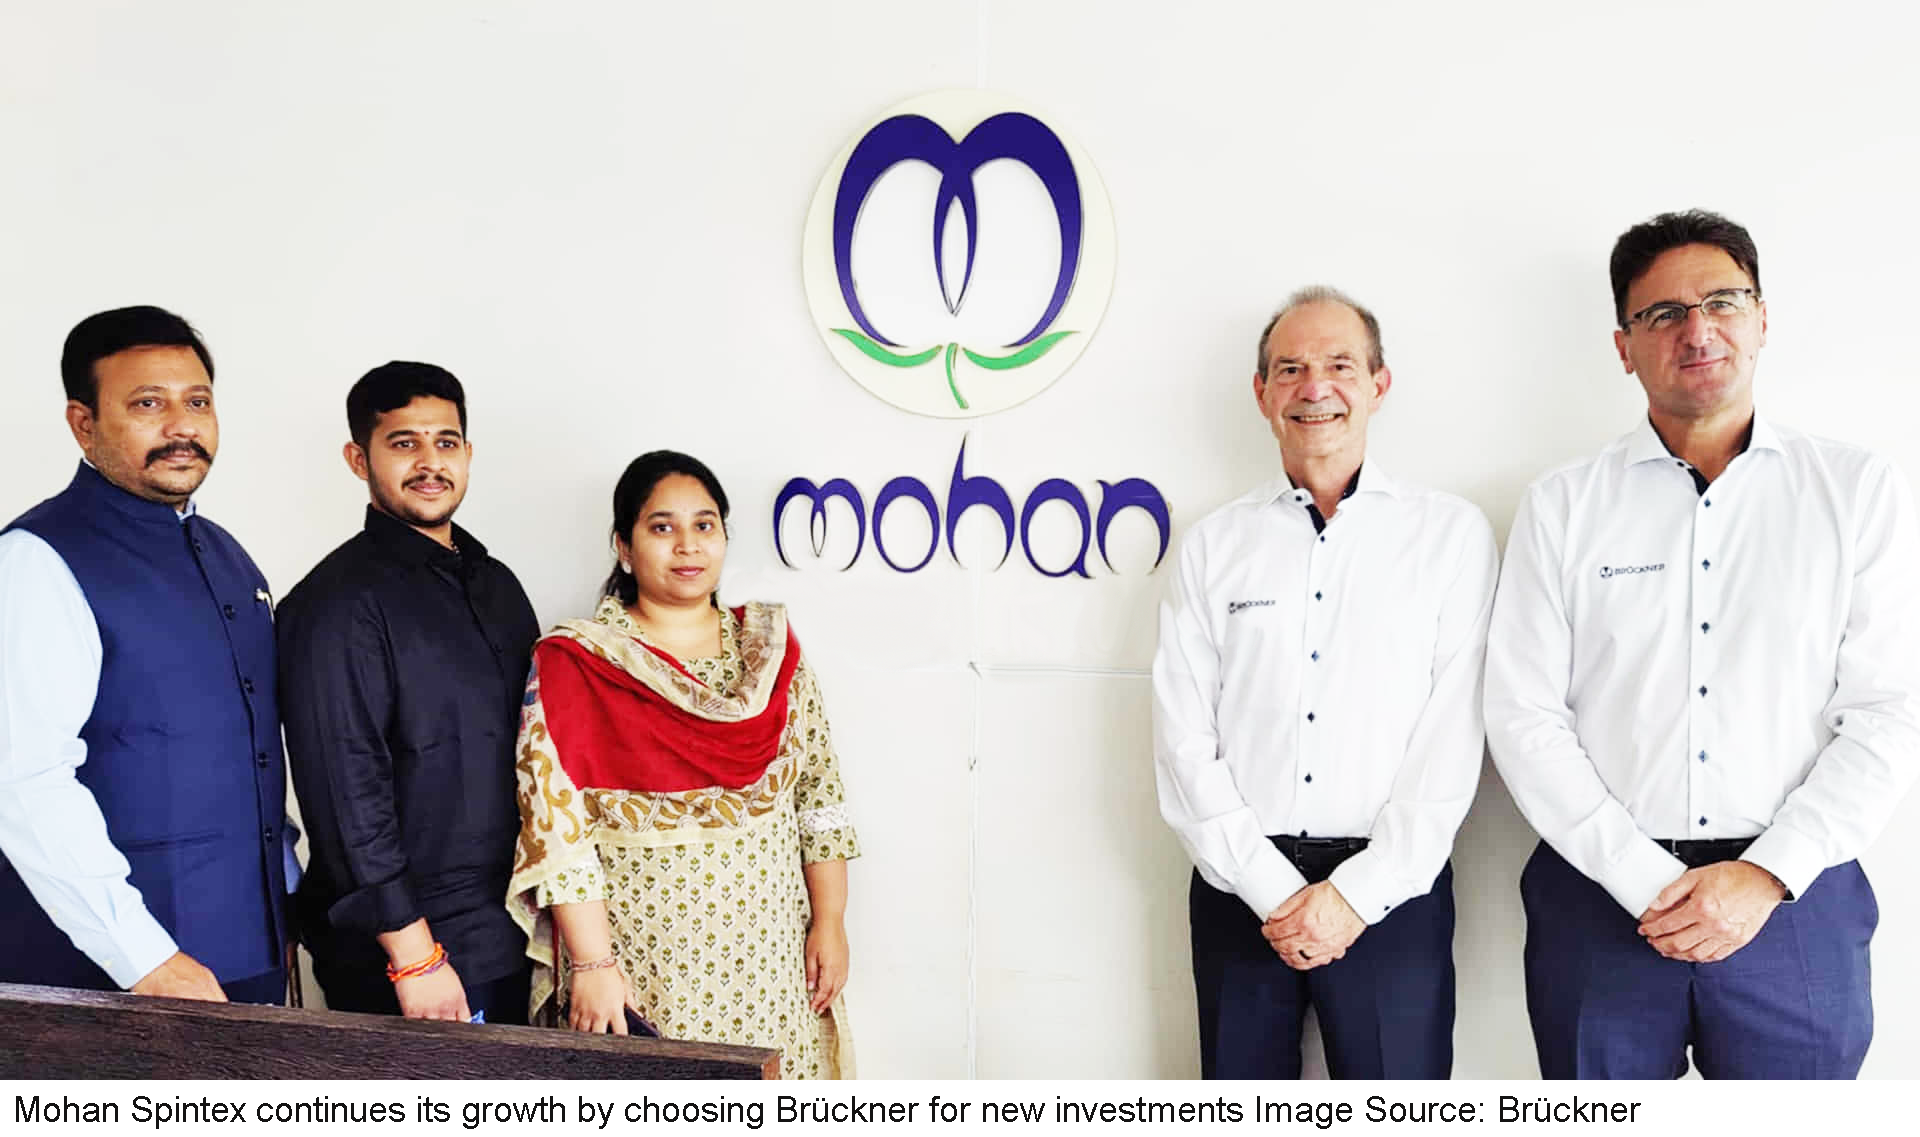 Mohan Spintex continues its growth by choosing Brückner for new investments